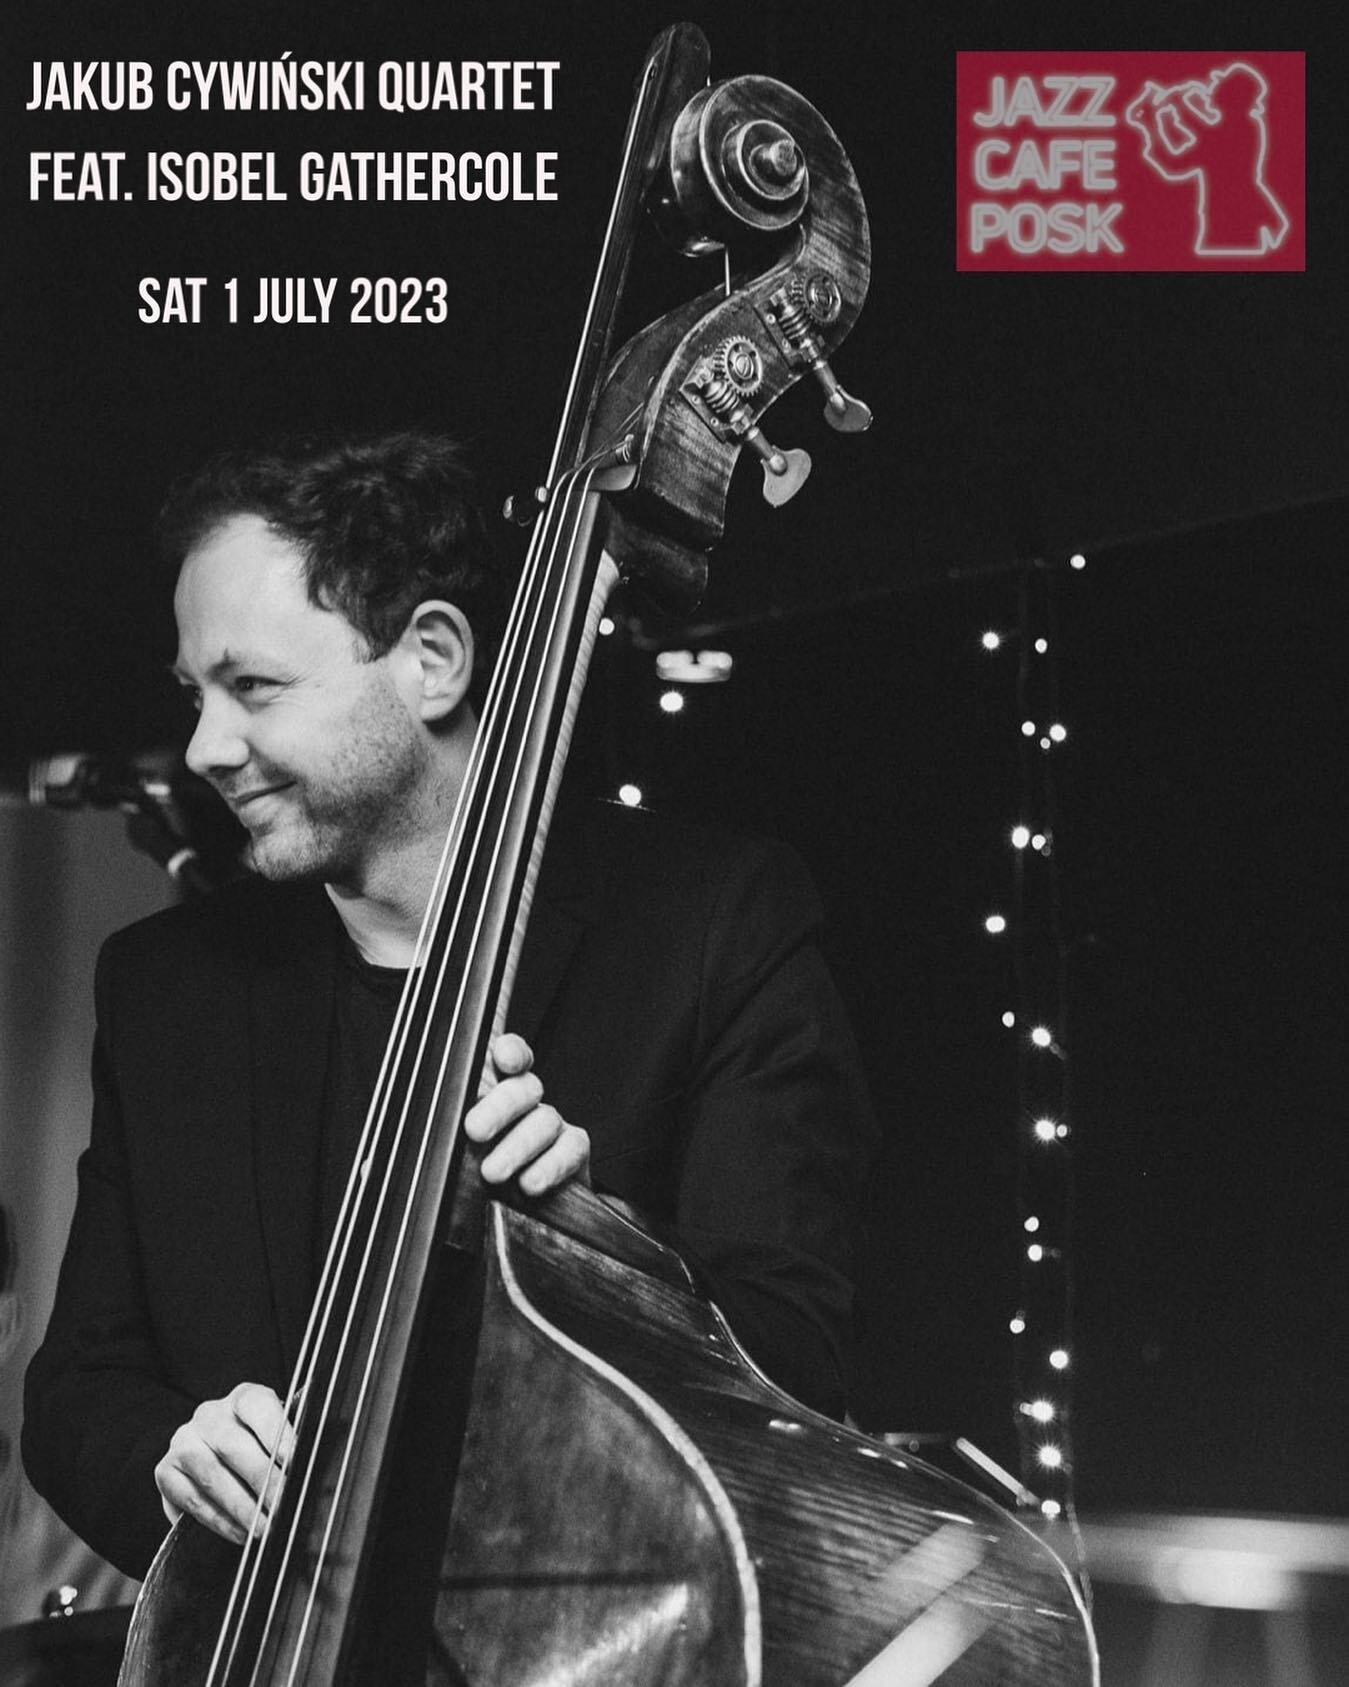 Looking forward to joining @jakubcyw @ericfordrums @isobelgathercole at the beautiful @jazzcafeposk Saturday 1 July 8:30pm! Link to tickets in bio 🎶🎟️